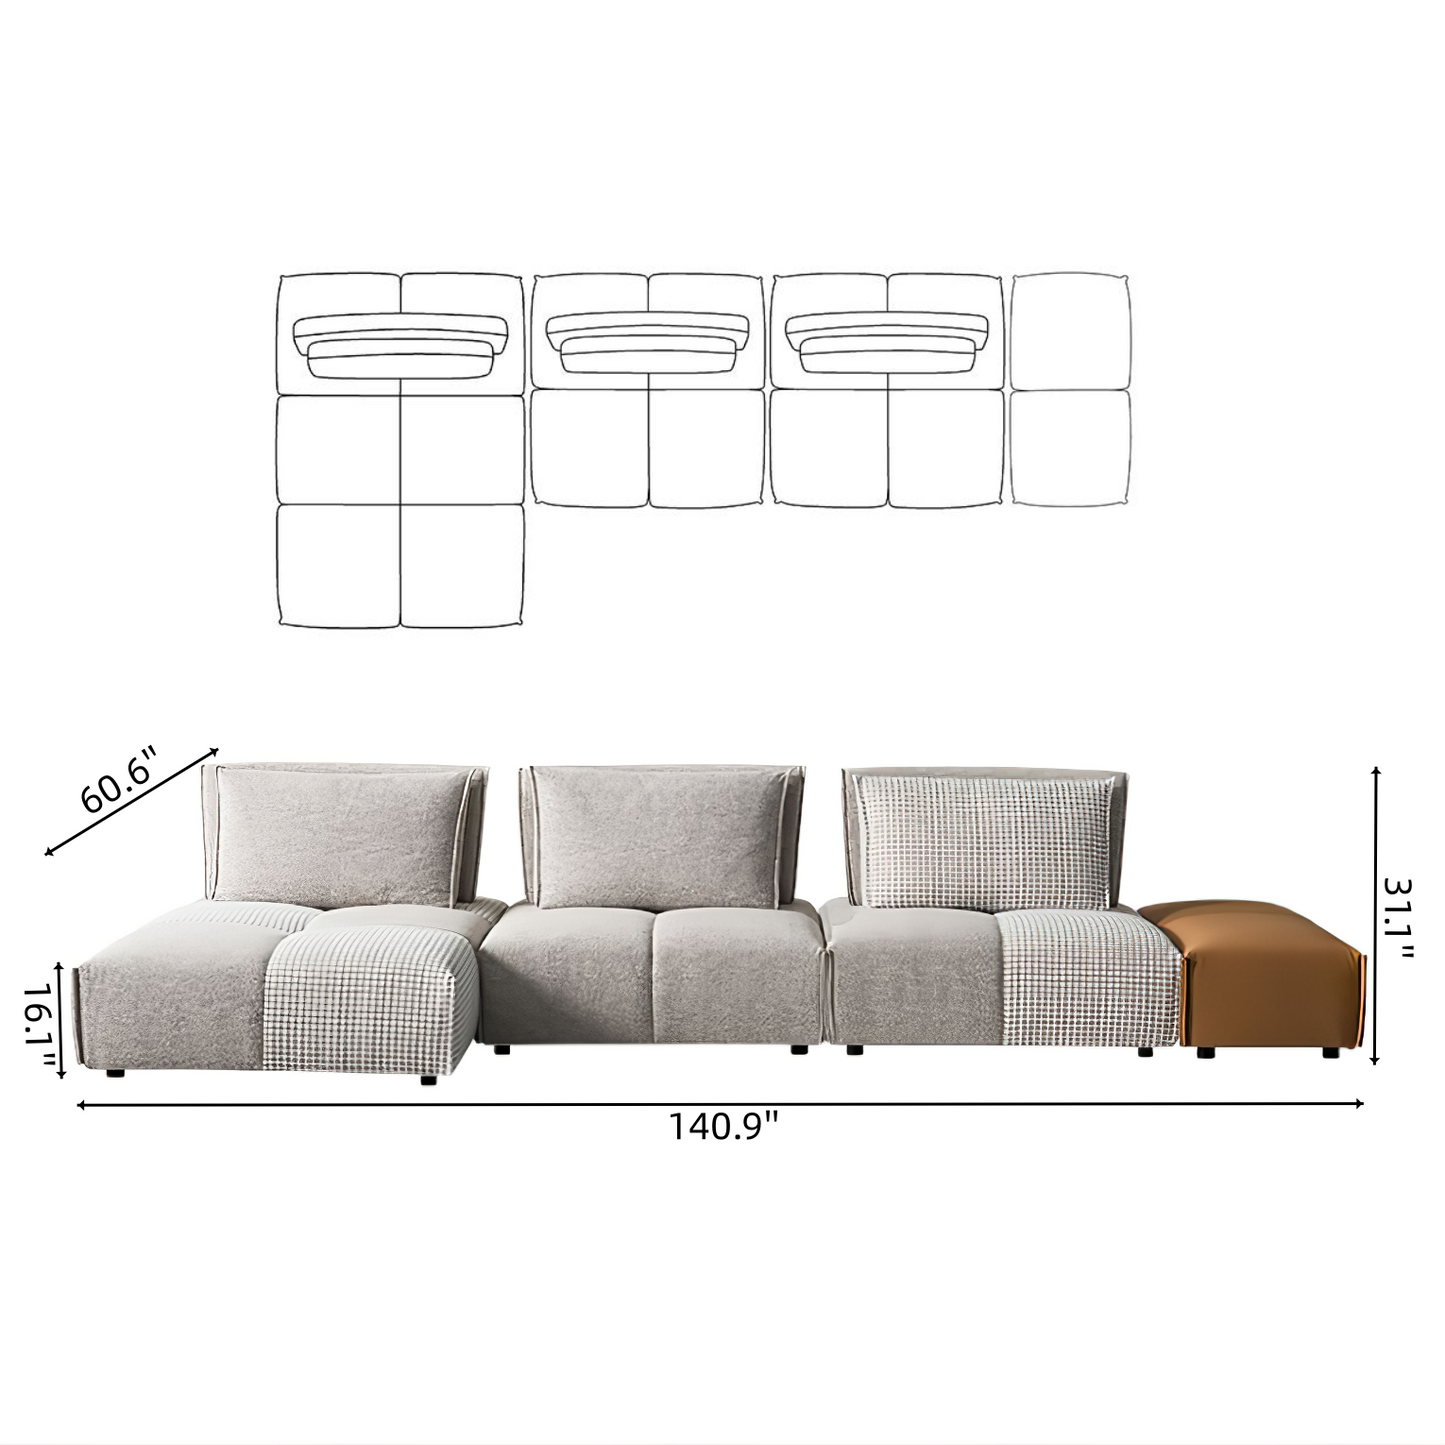 Classical Upholstered Modular Sectional